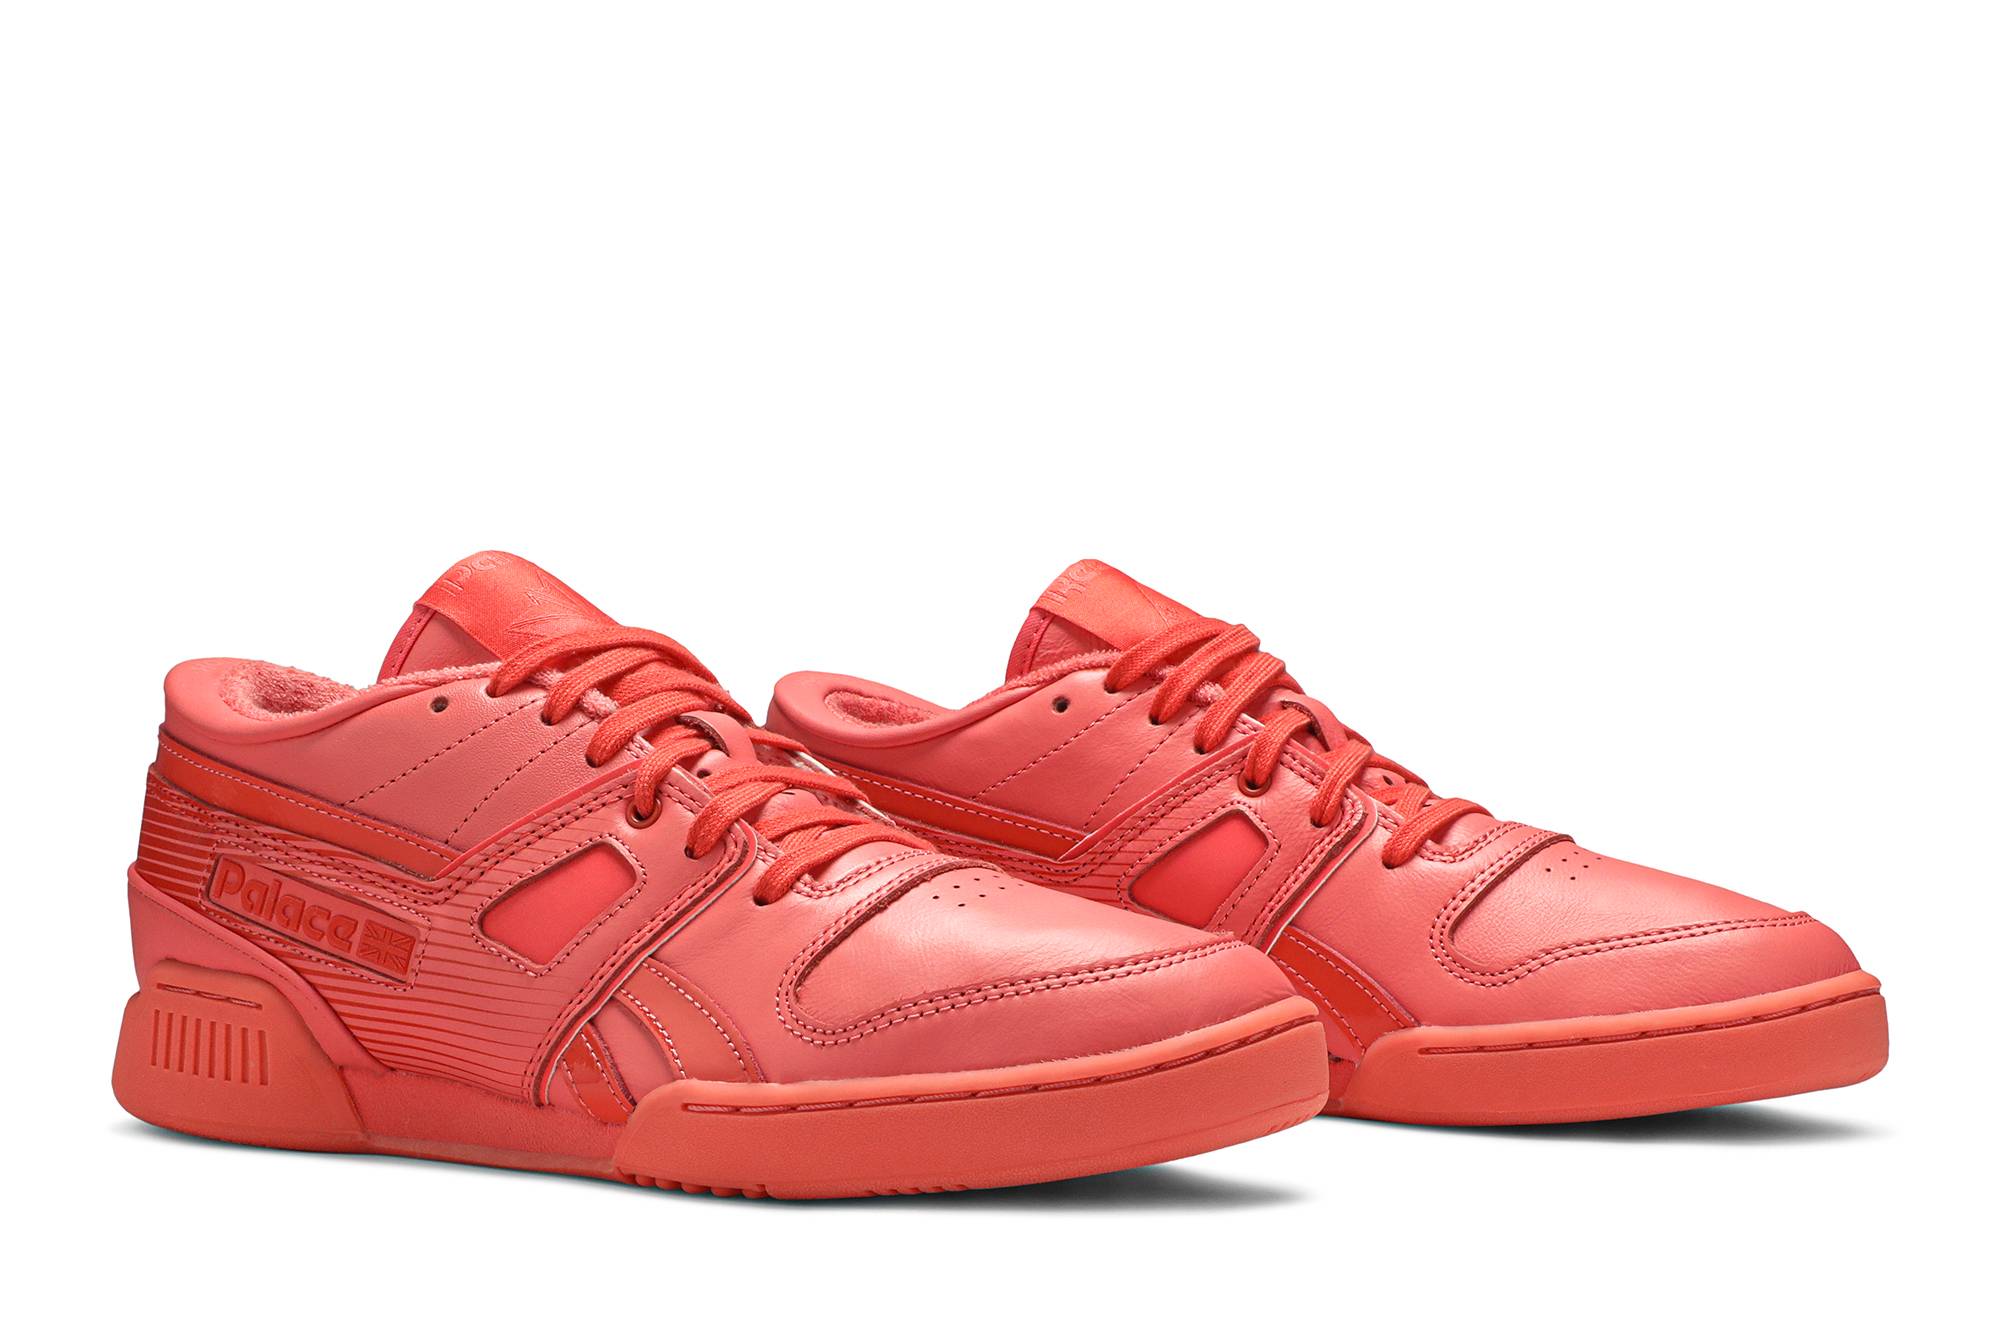 Palace x Reebok Pro Workout Low 'Red' EH2817 - EH2817 - Novelship